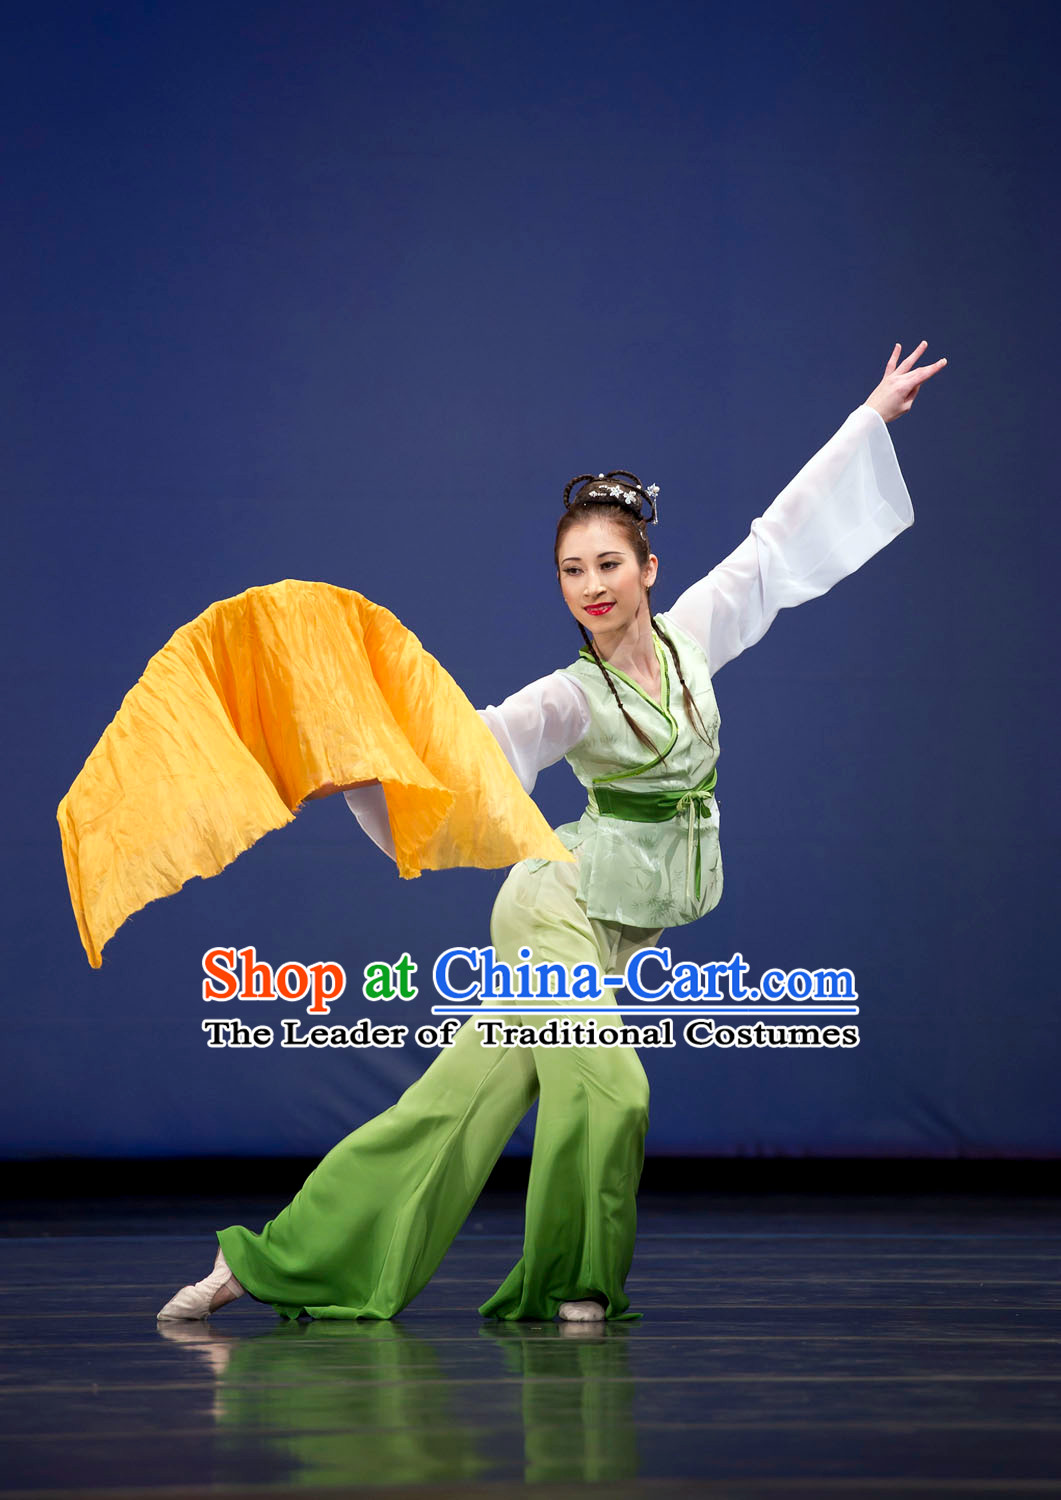 Chinese Folk Group Fan Dance Costume Chinese Costumes Carnival Costumes Fancy Dress National Garment